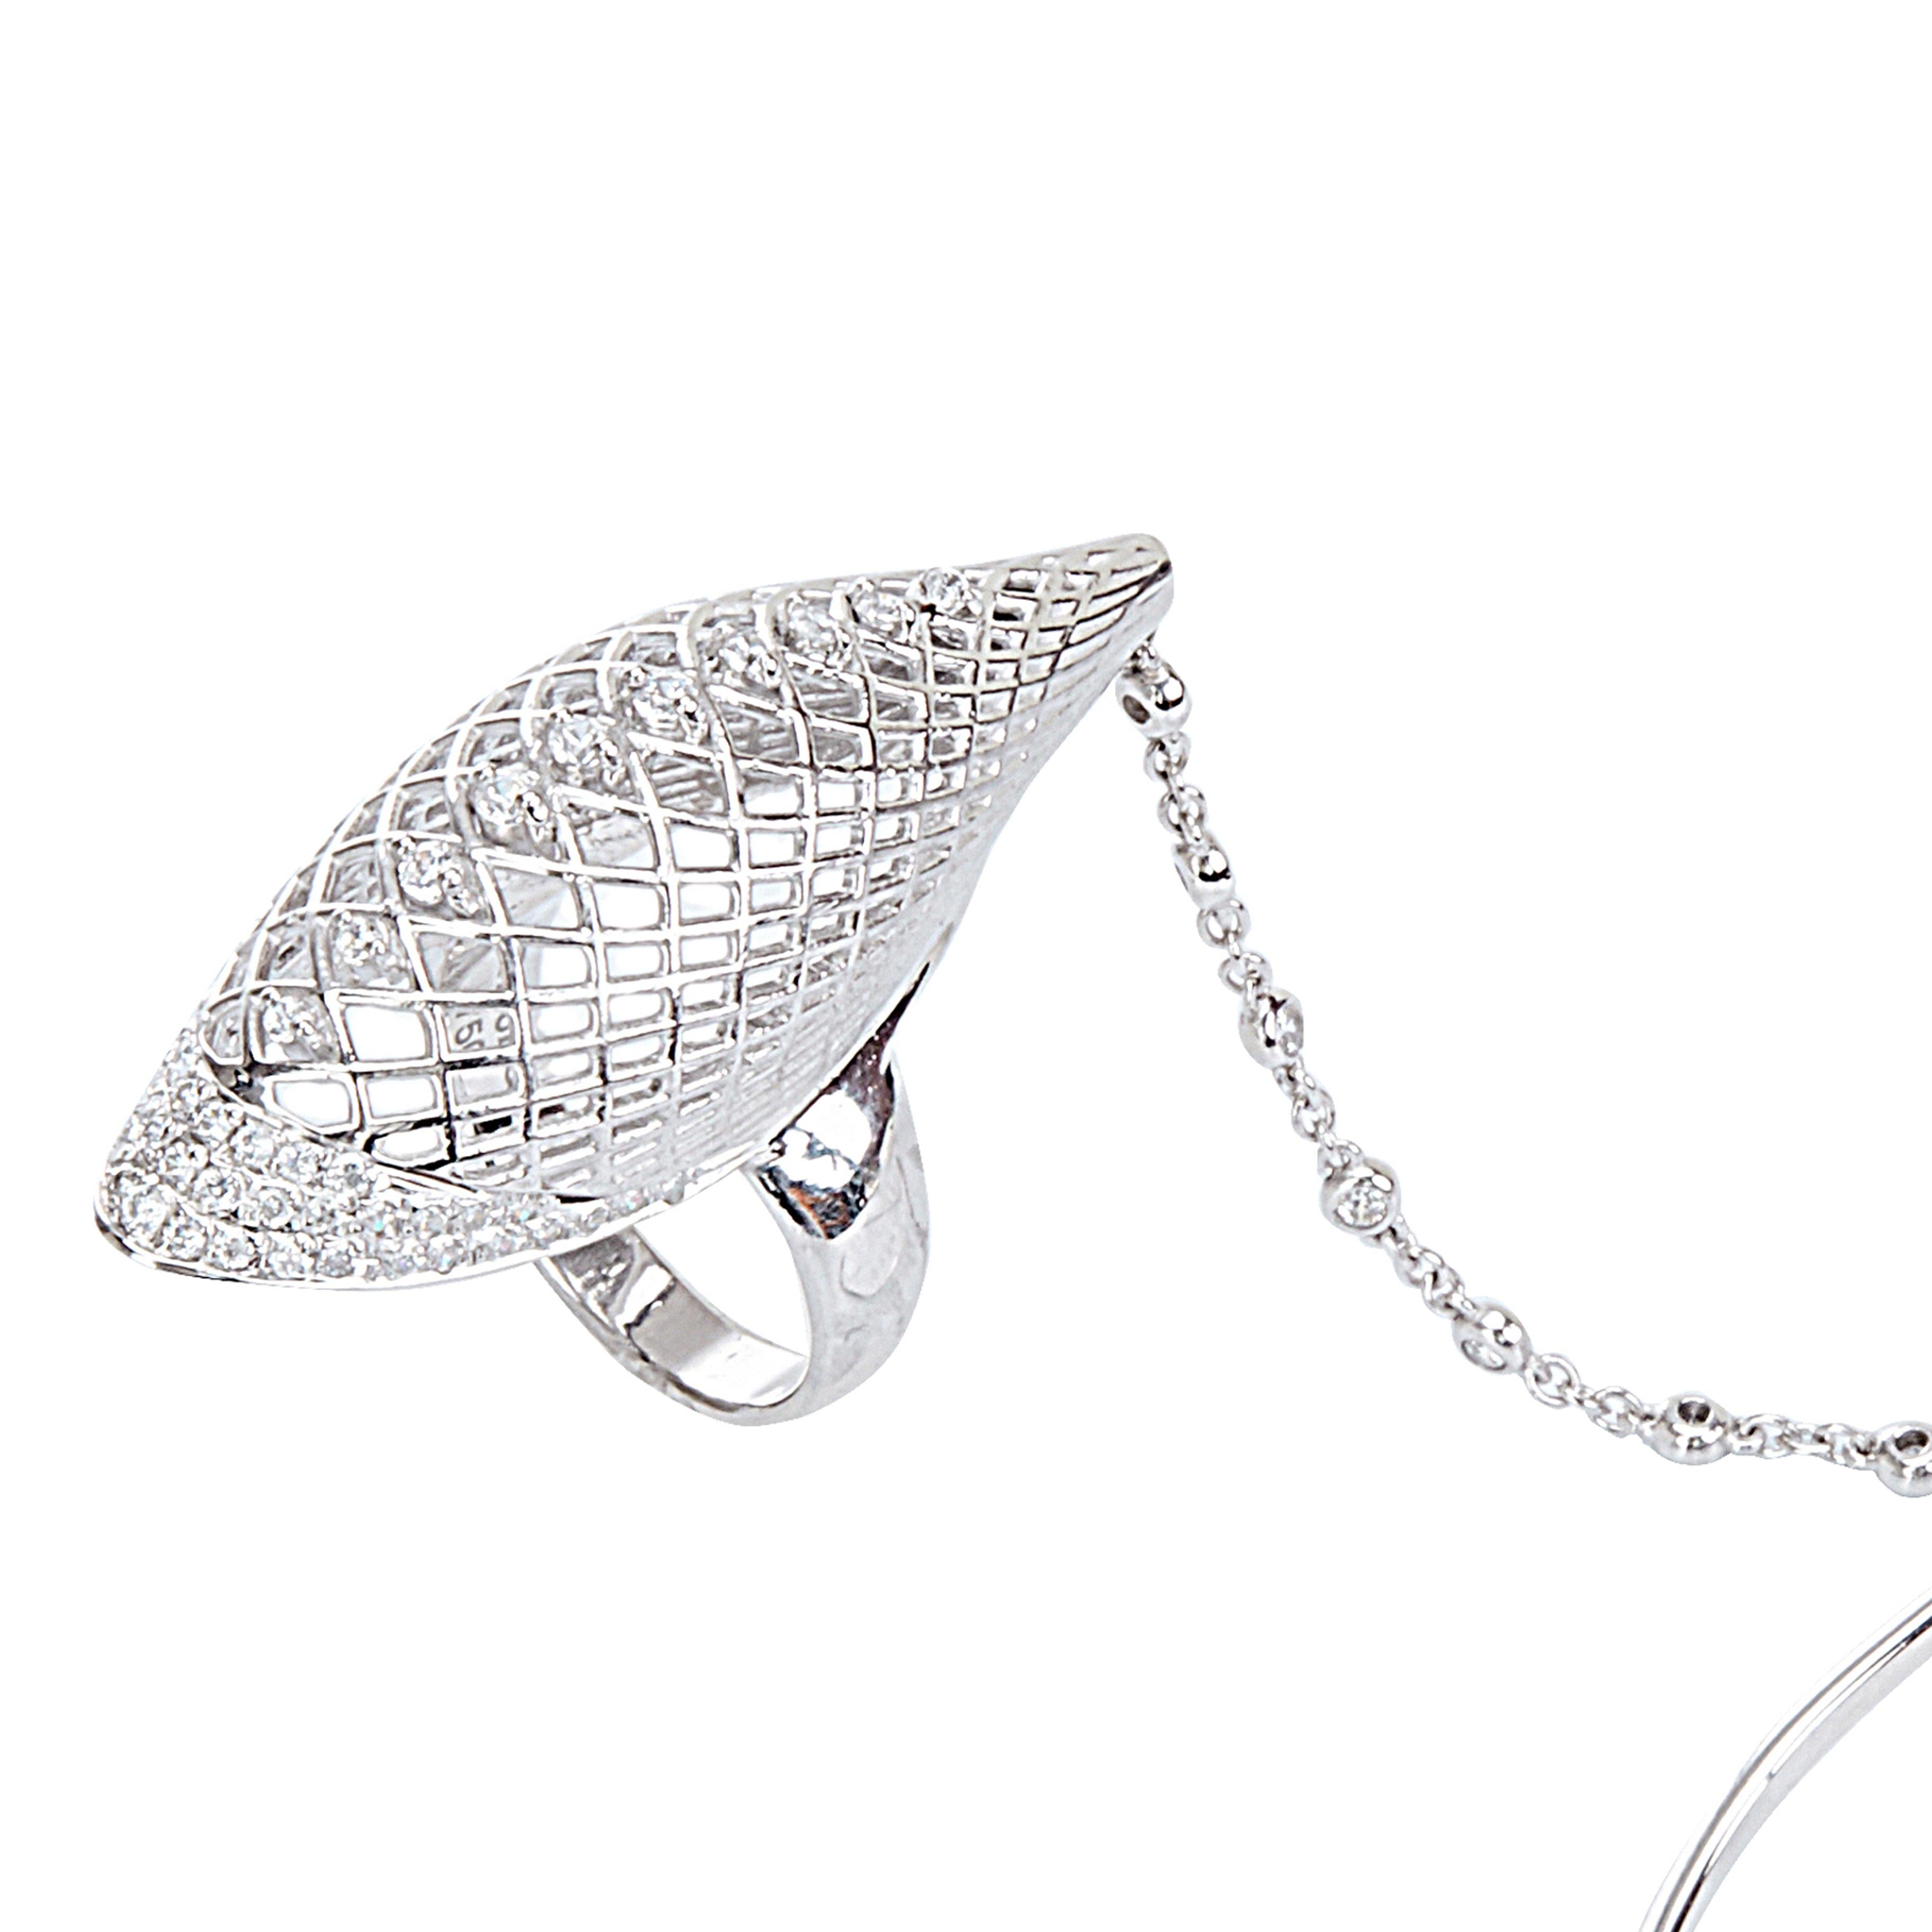 'Wings' is an inspired design from a vigorous flight to a new era. The streamlined design is made sleeker using her own YEMYUNGJI Signature Meshwork, adding it an urban feel.
Glowing diamonds are set with her meshwork, adding dignity and delicacy to